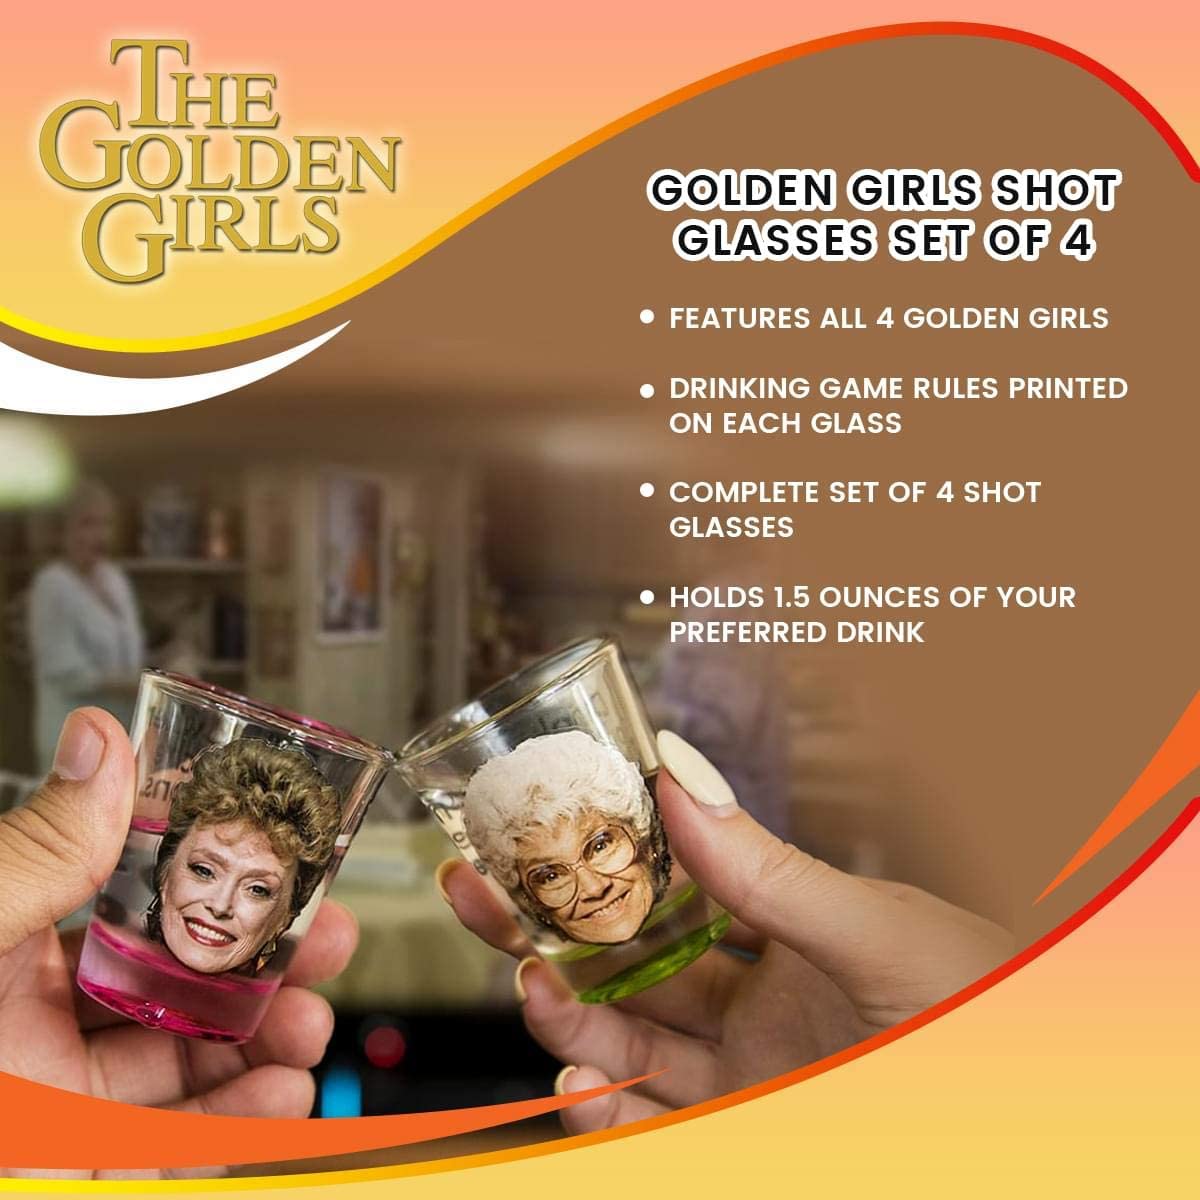 Two hands are holding Golden Girls shot glasses and clinking them together. In the background is a scene from the Golden Girls tv show as well as instructions on how to play the game.